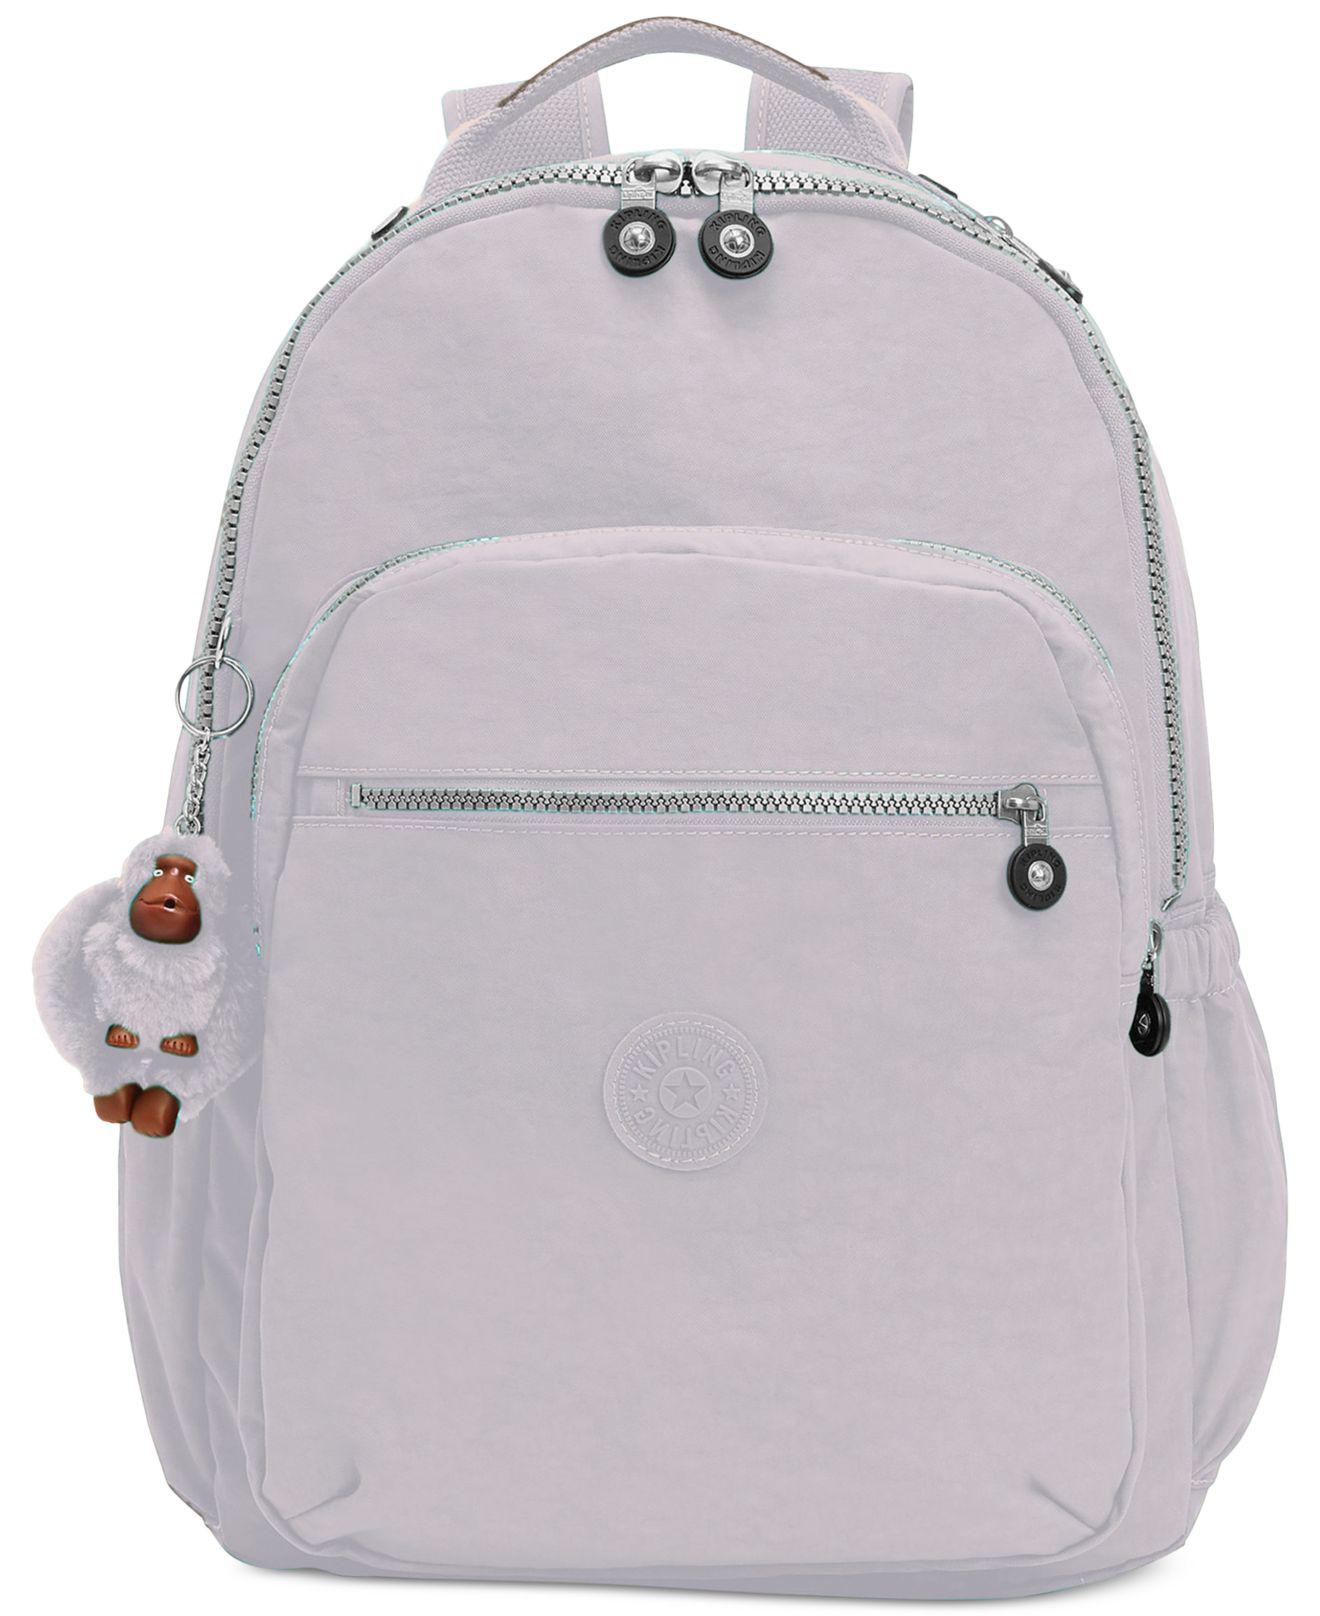 Kipling Synthetic Seoul Go Large Backpack in Slate Grey/Silver (Gray) - Lyst